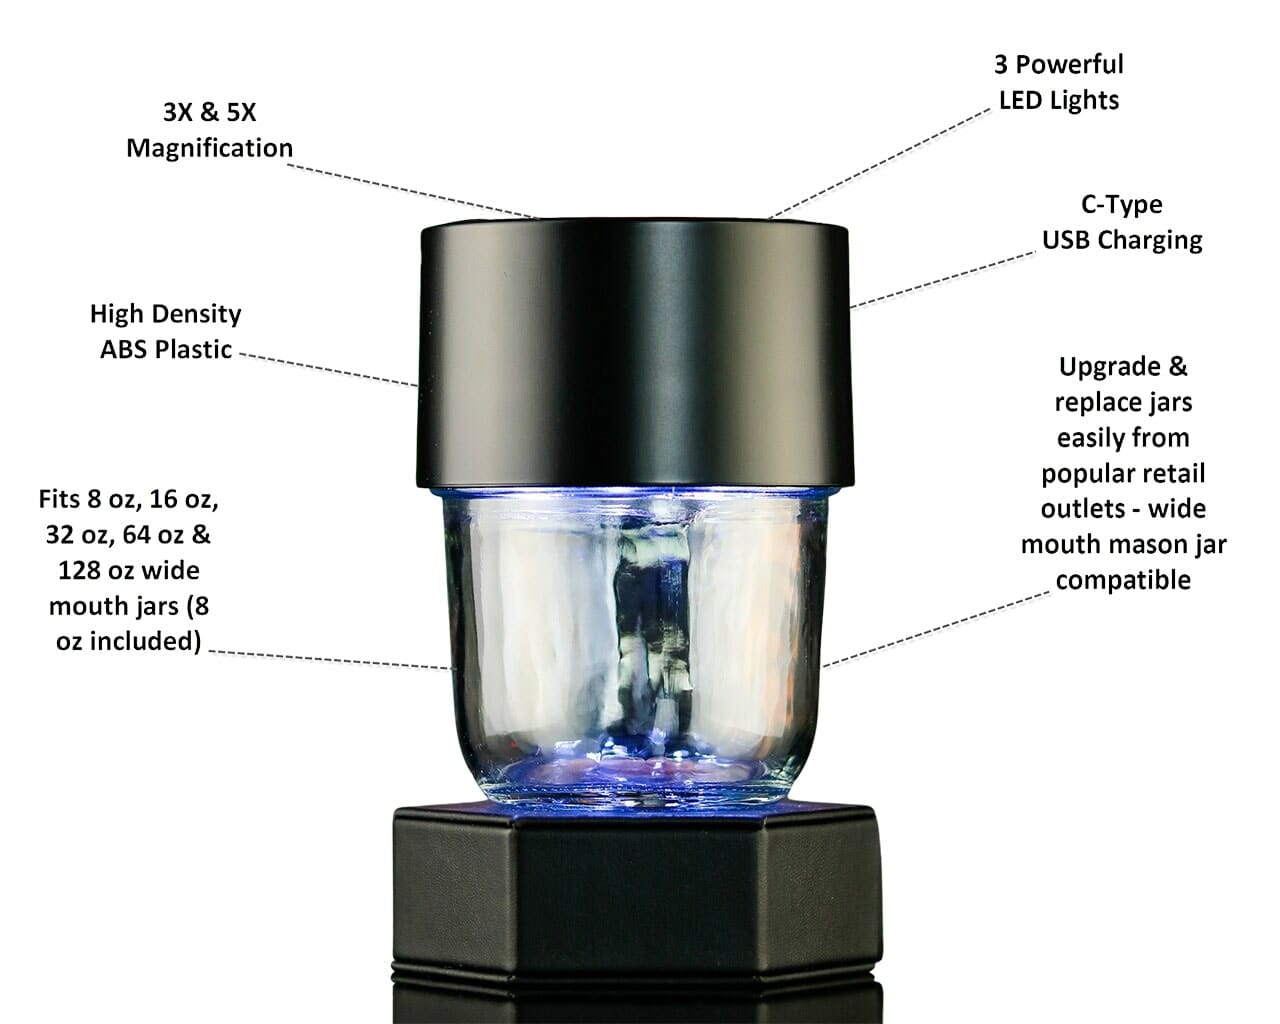 masonbrite-2.0-features-mason-jar-magnifying-lid-wide-mouth-led-light